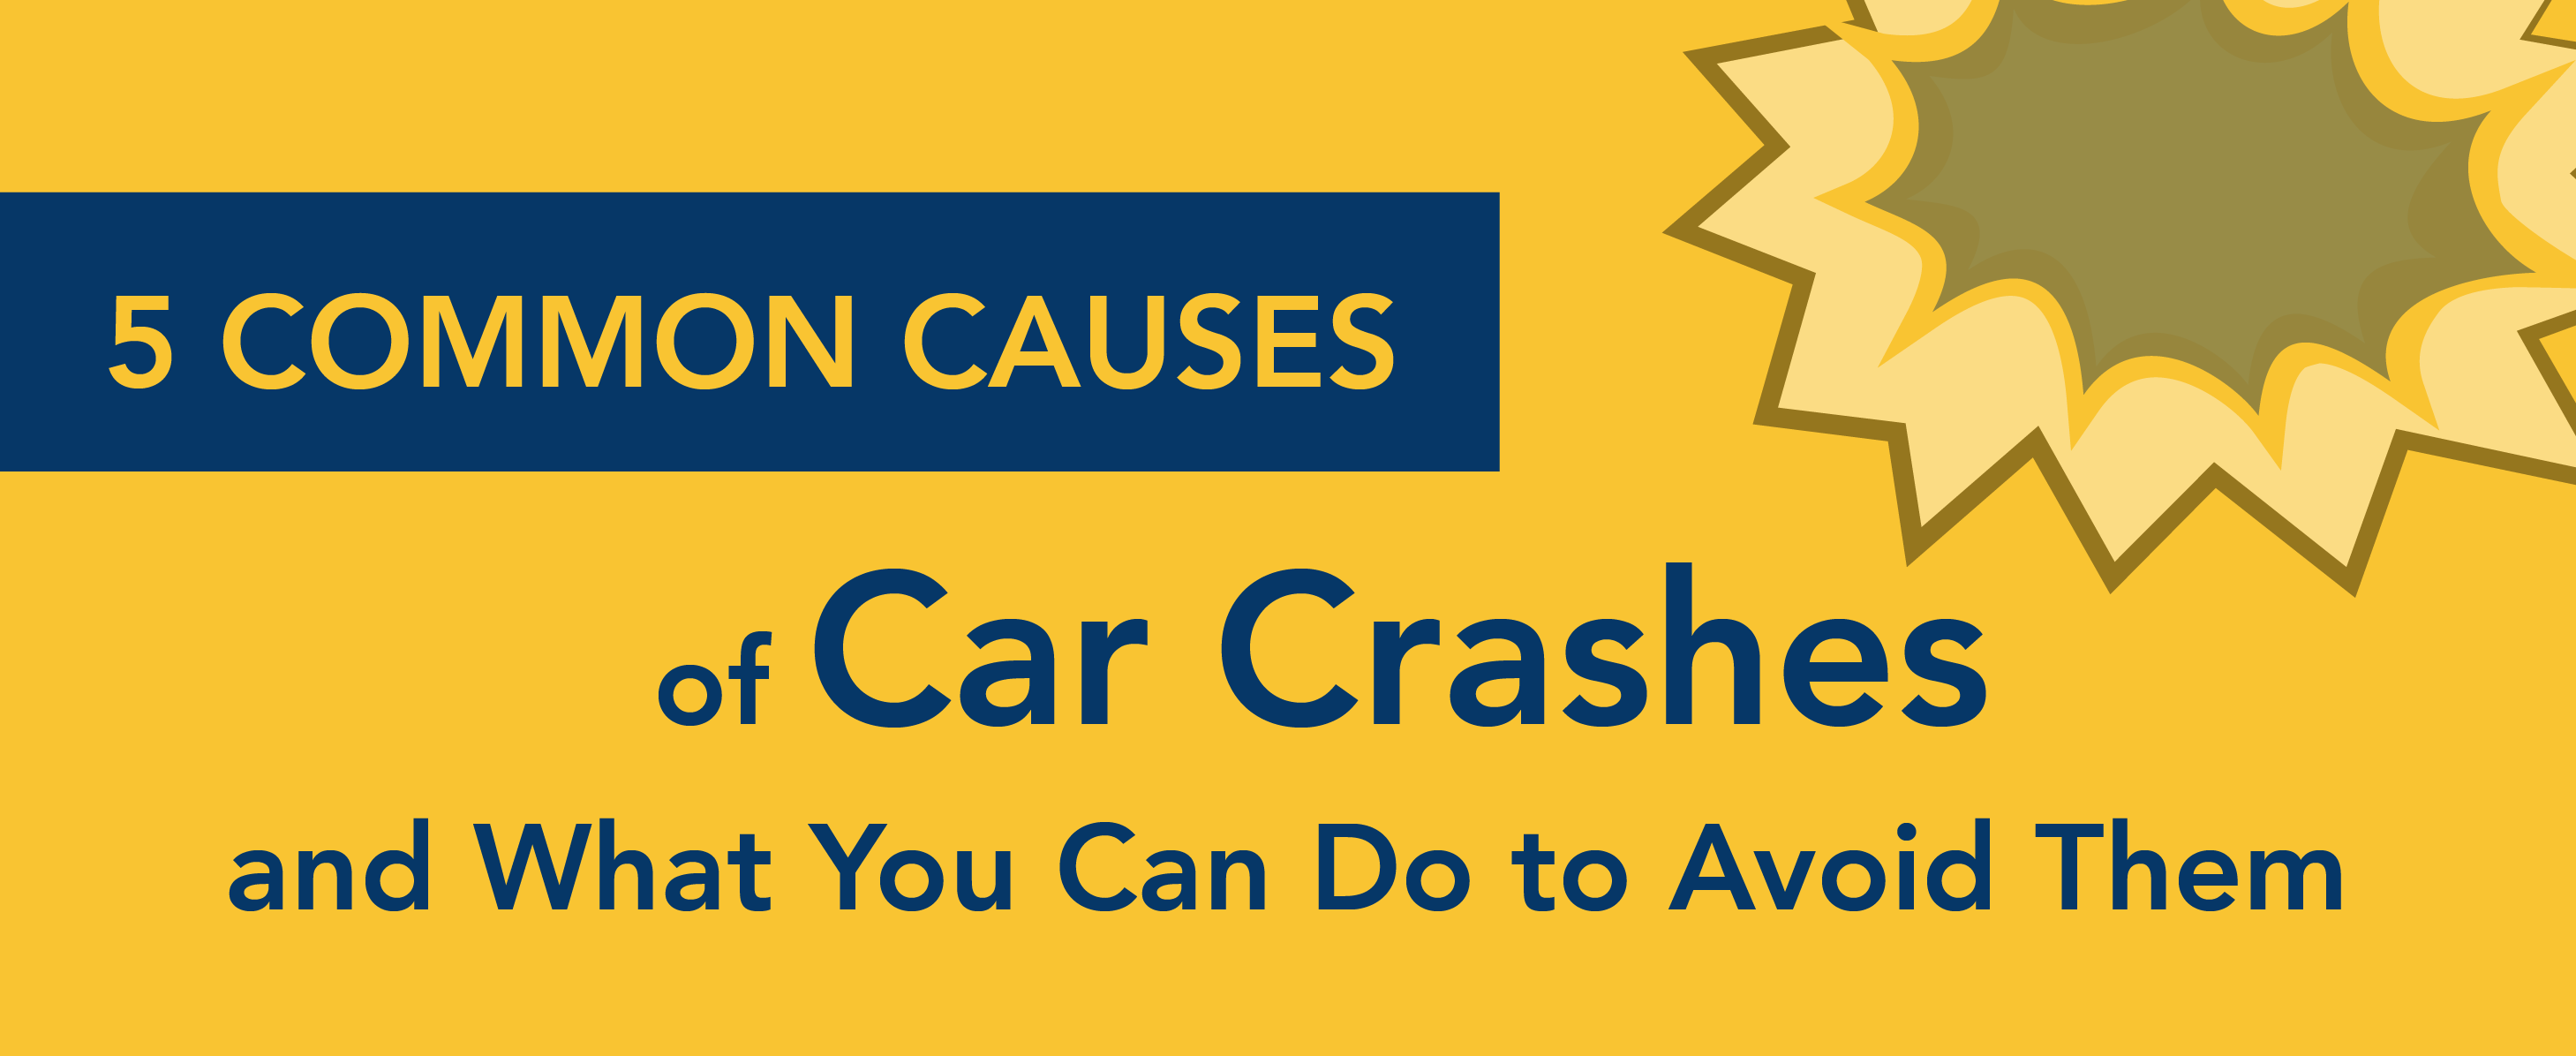 5 common causes for car crashes and what you can do to avoid them